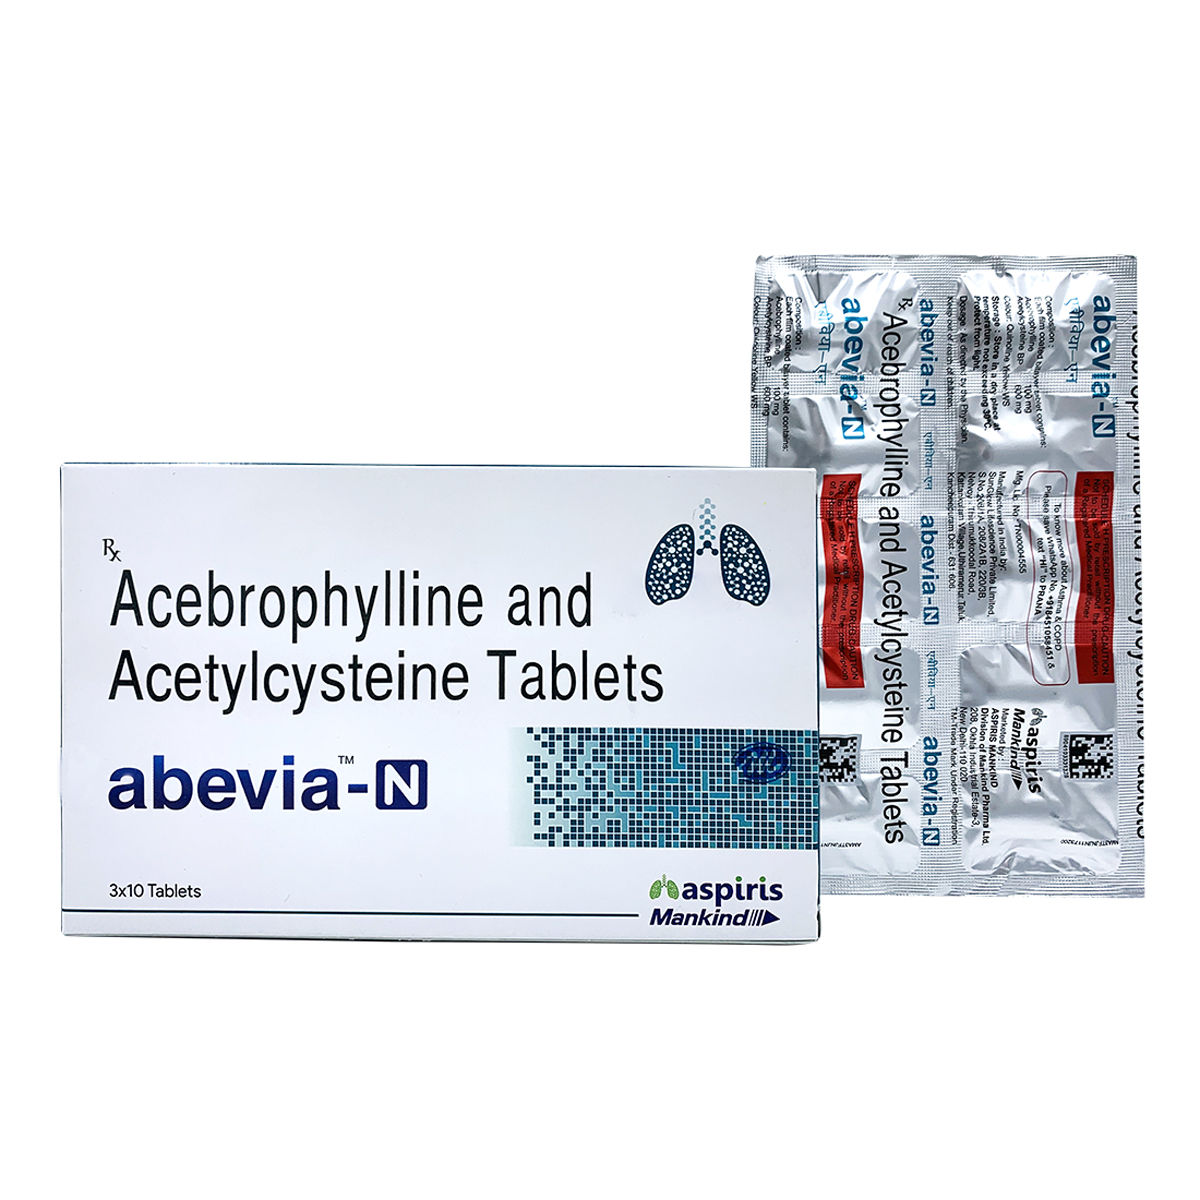 Abevia-N Tablet 10's Price, Uses, Side Effects, Composition ...